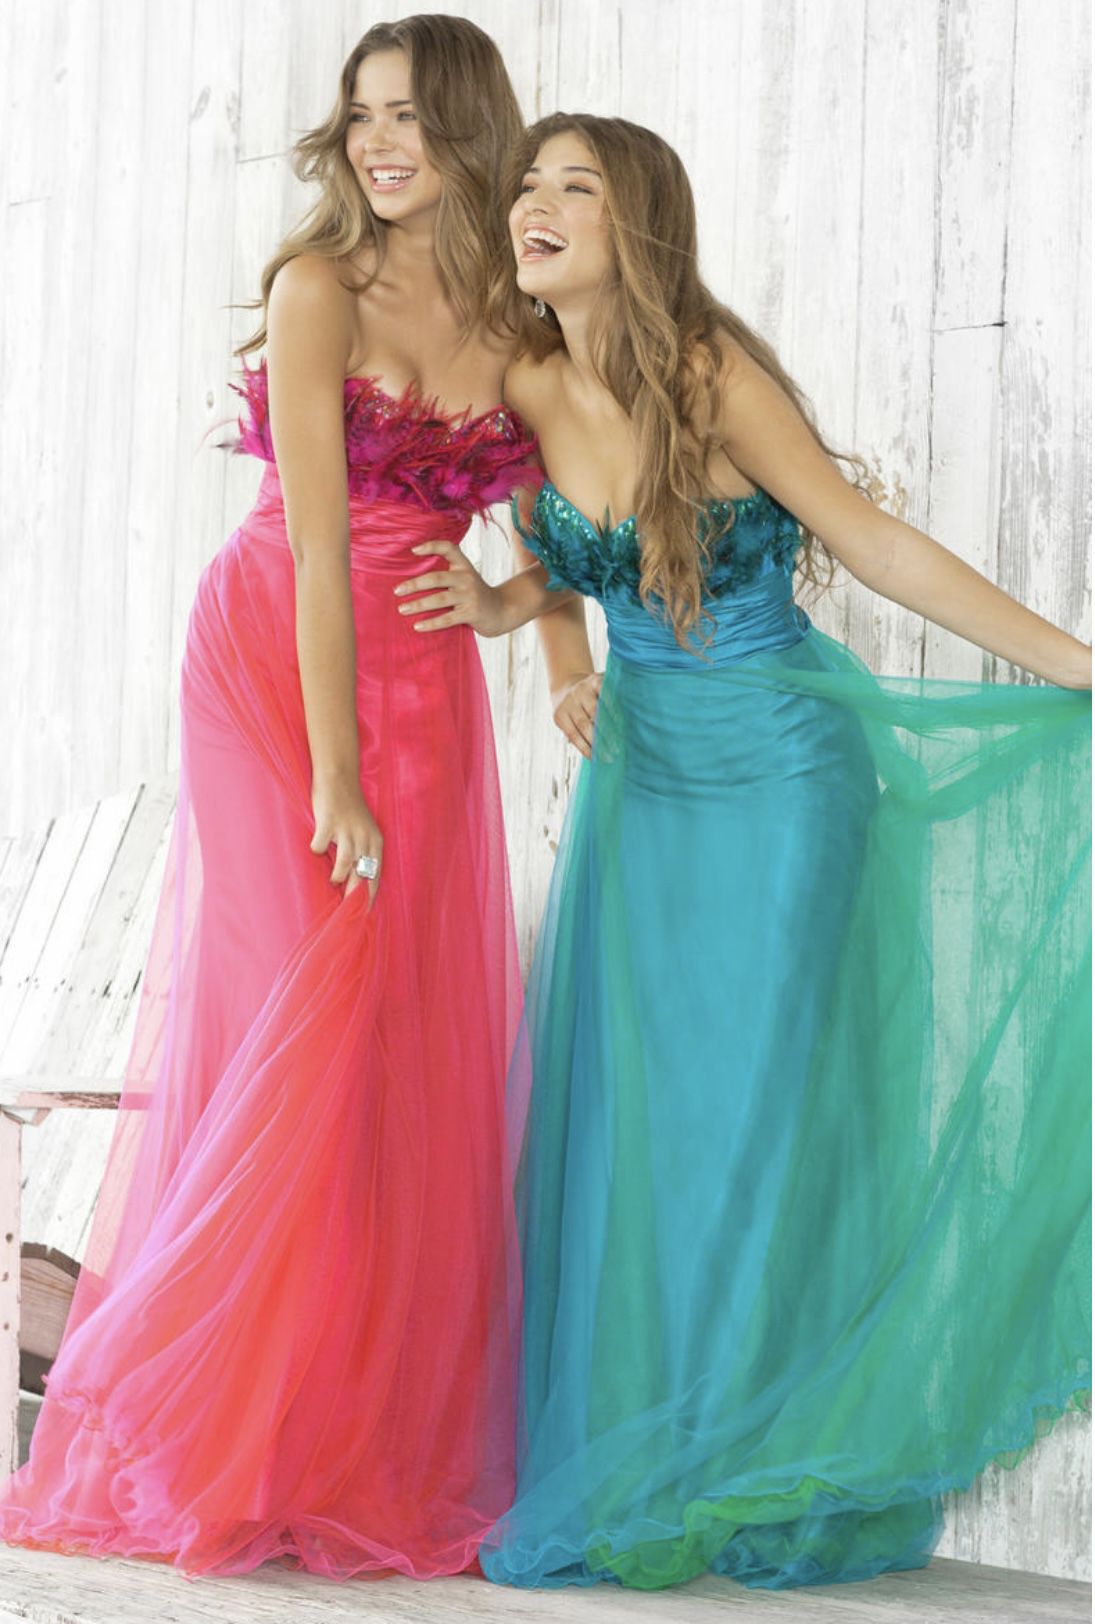 New With Tags Blush Prom Formal Dresses & Prom Dresses $99